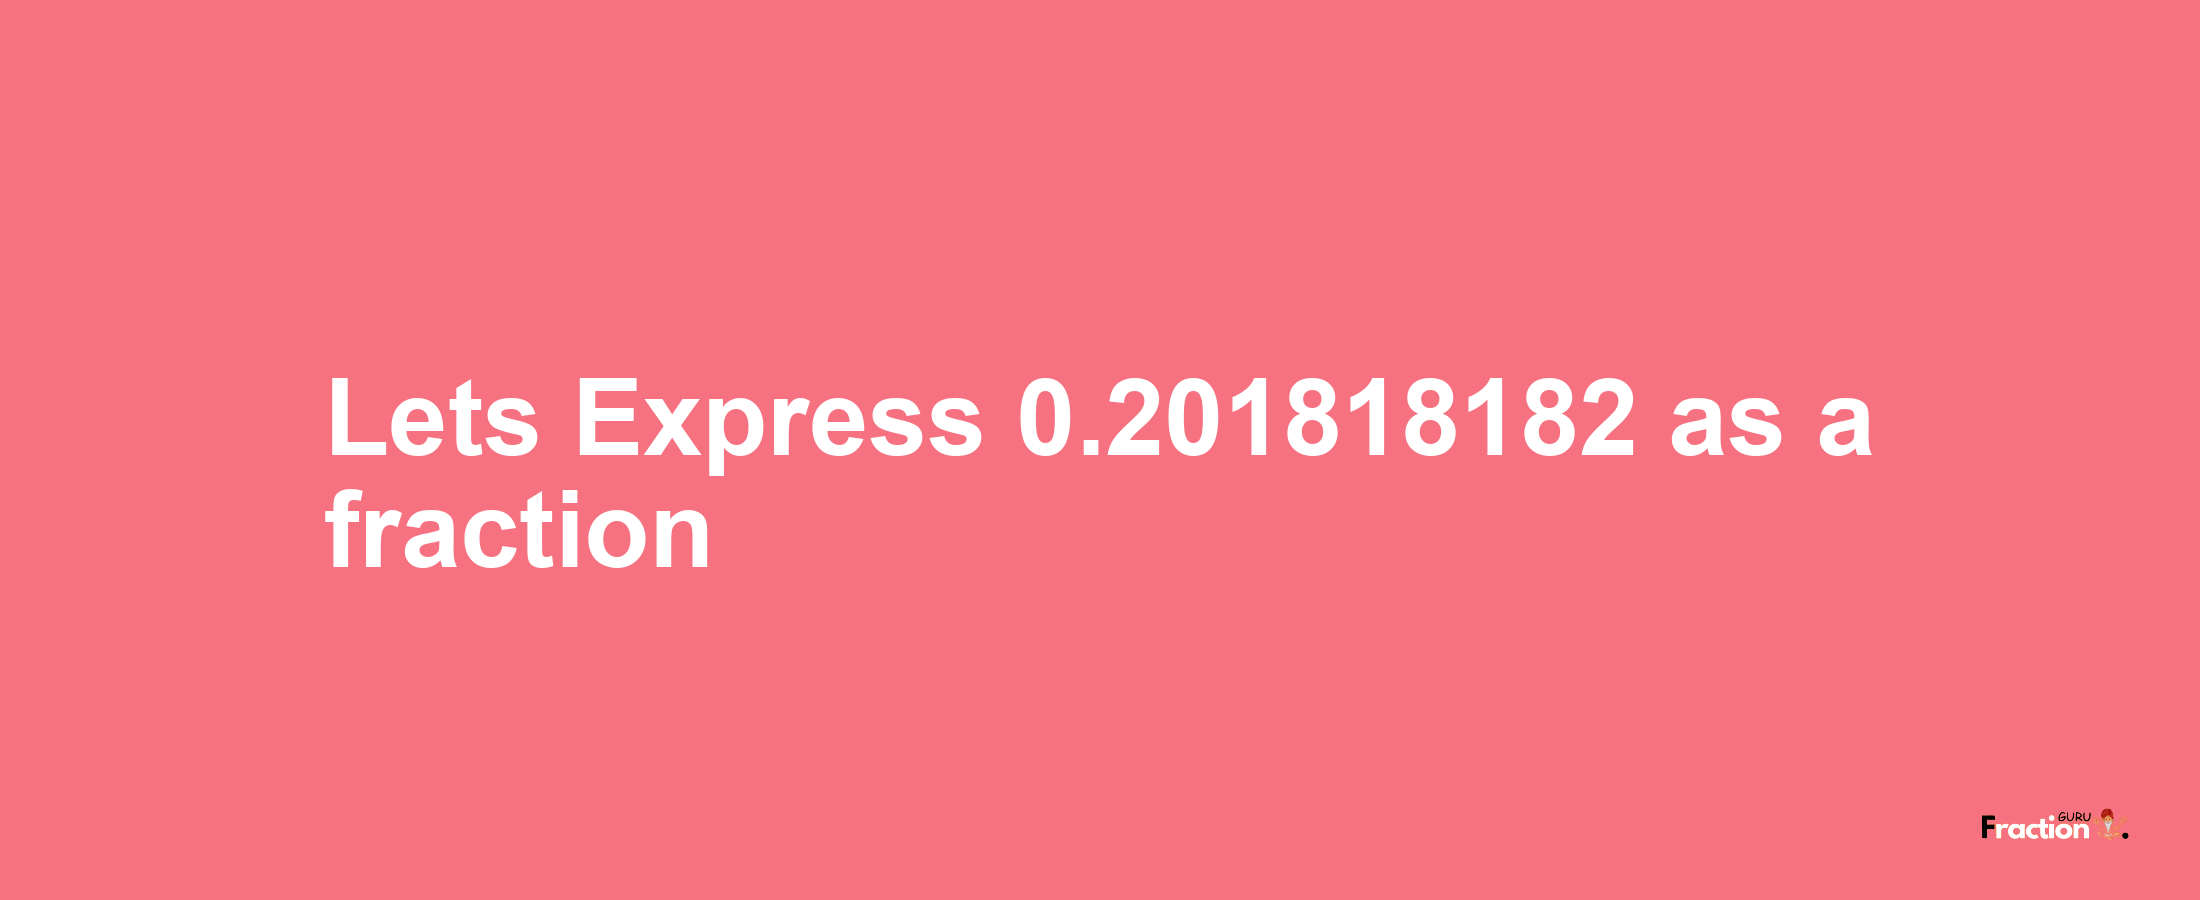 Lets Express 0.201818182 as afraction